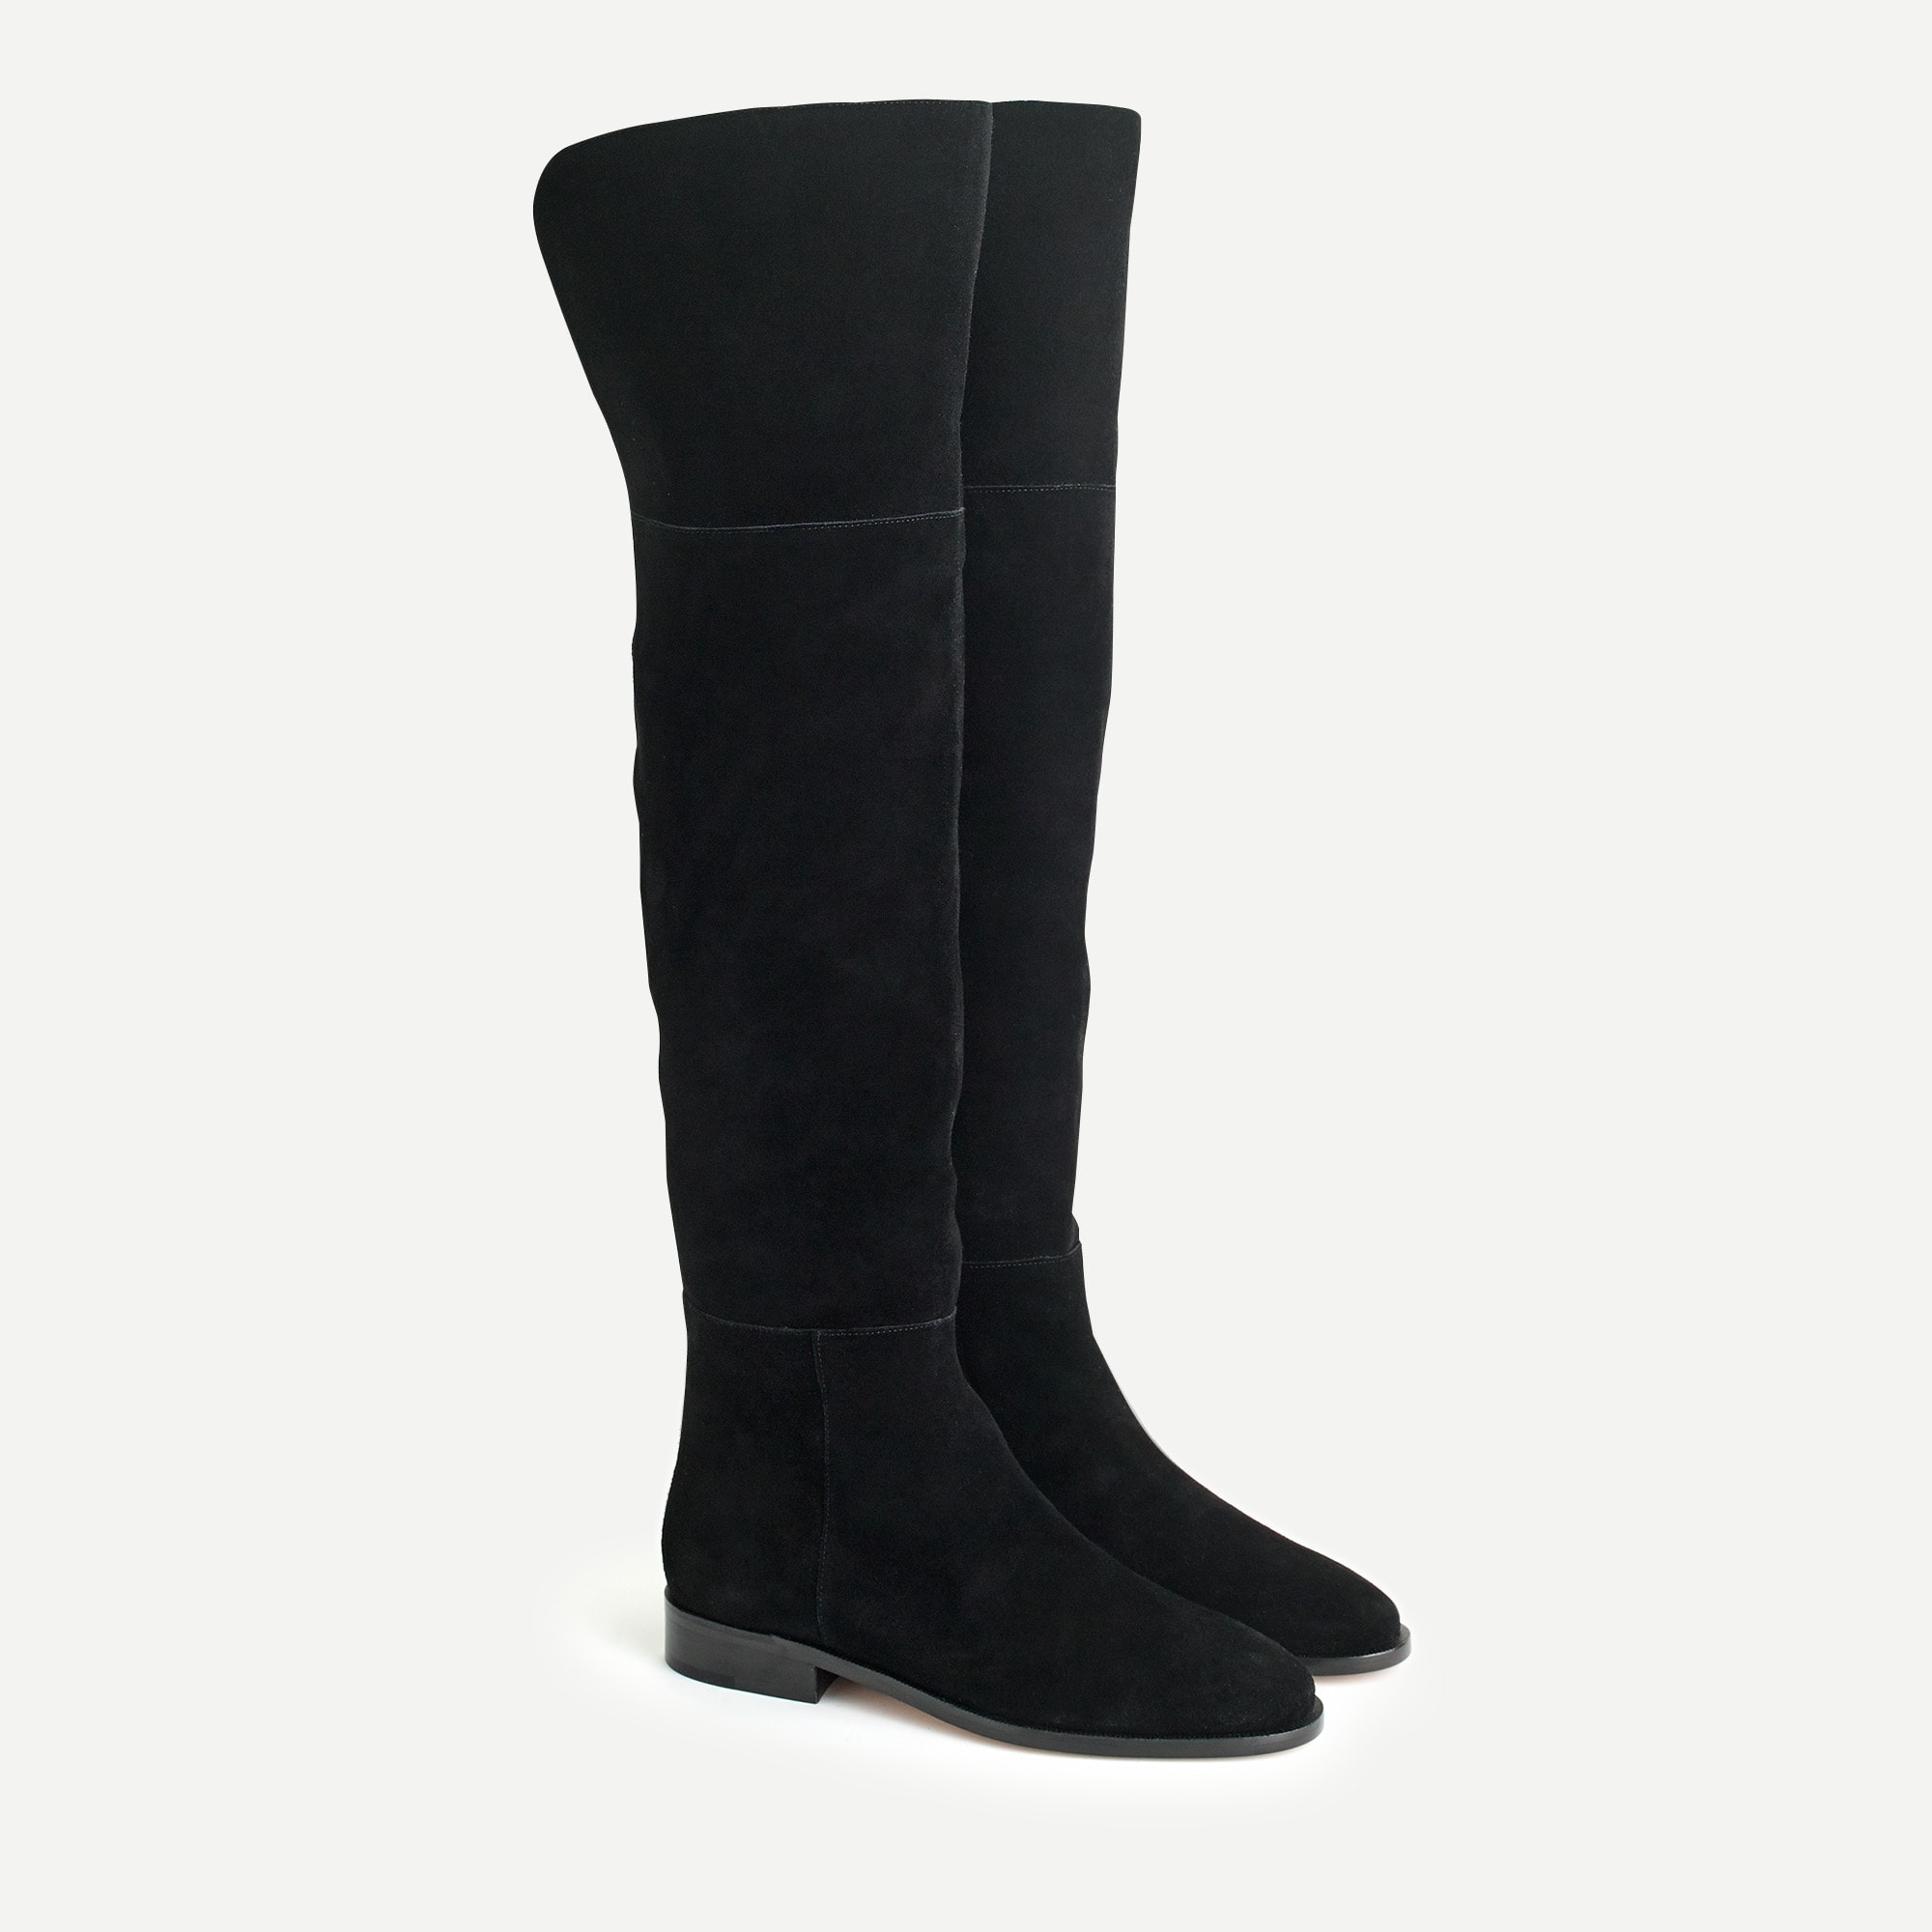 women's above the knee boots